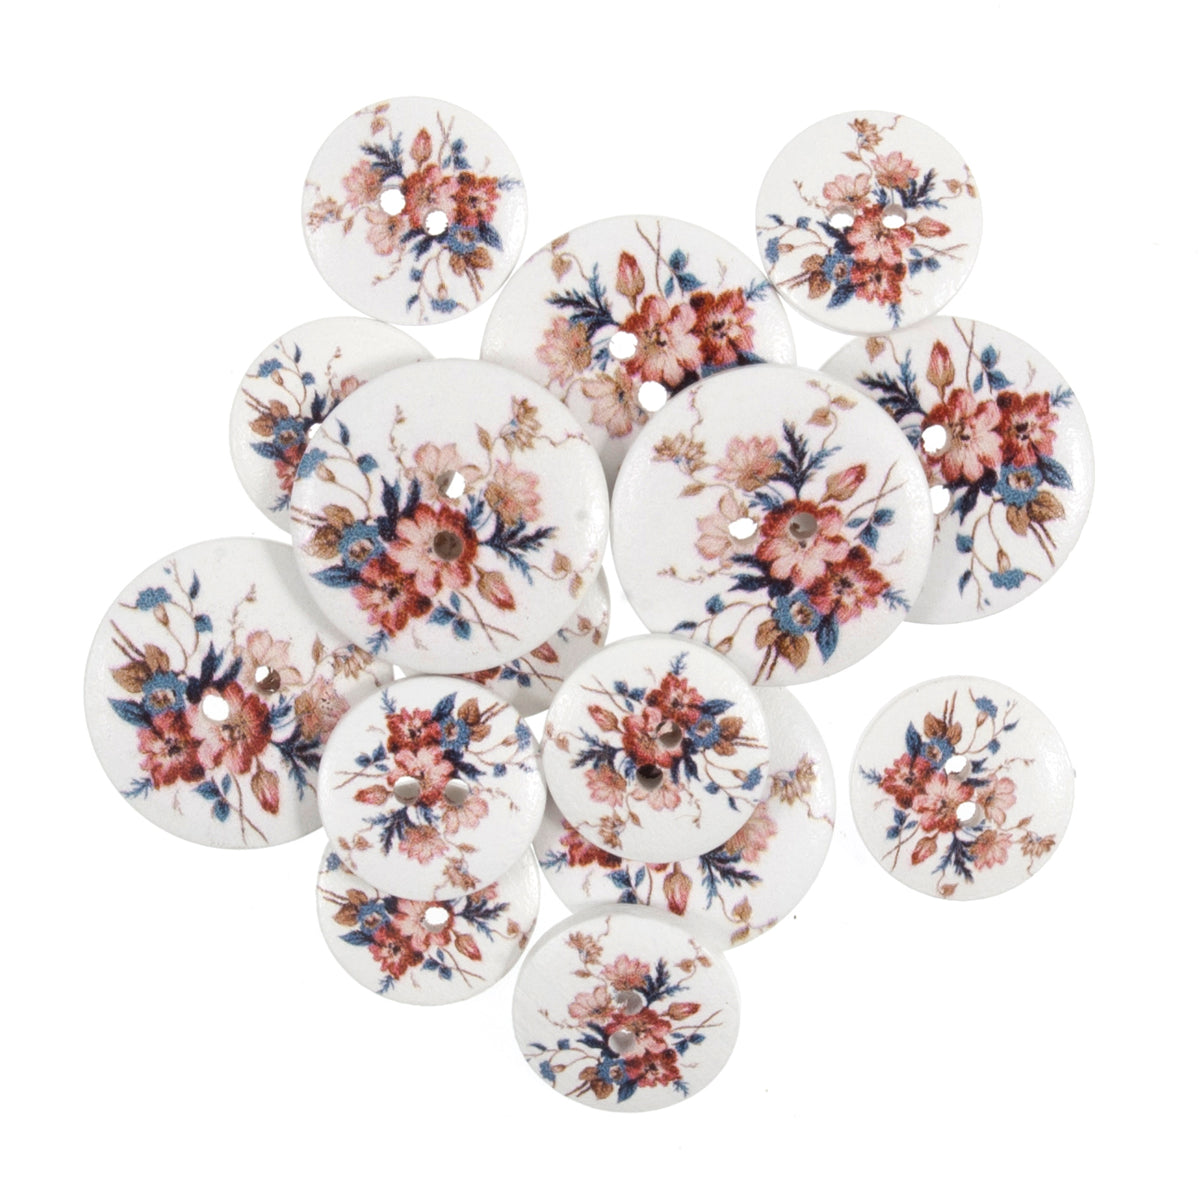 Craft Buttons - Dainty Floral